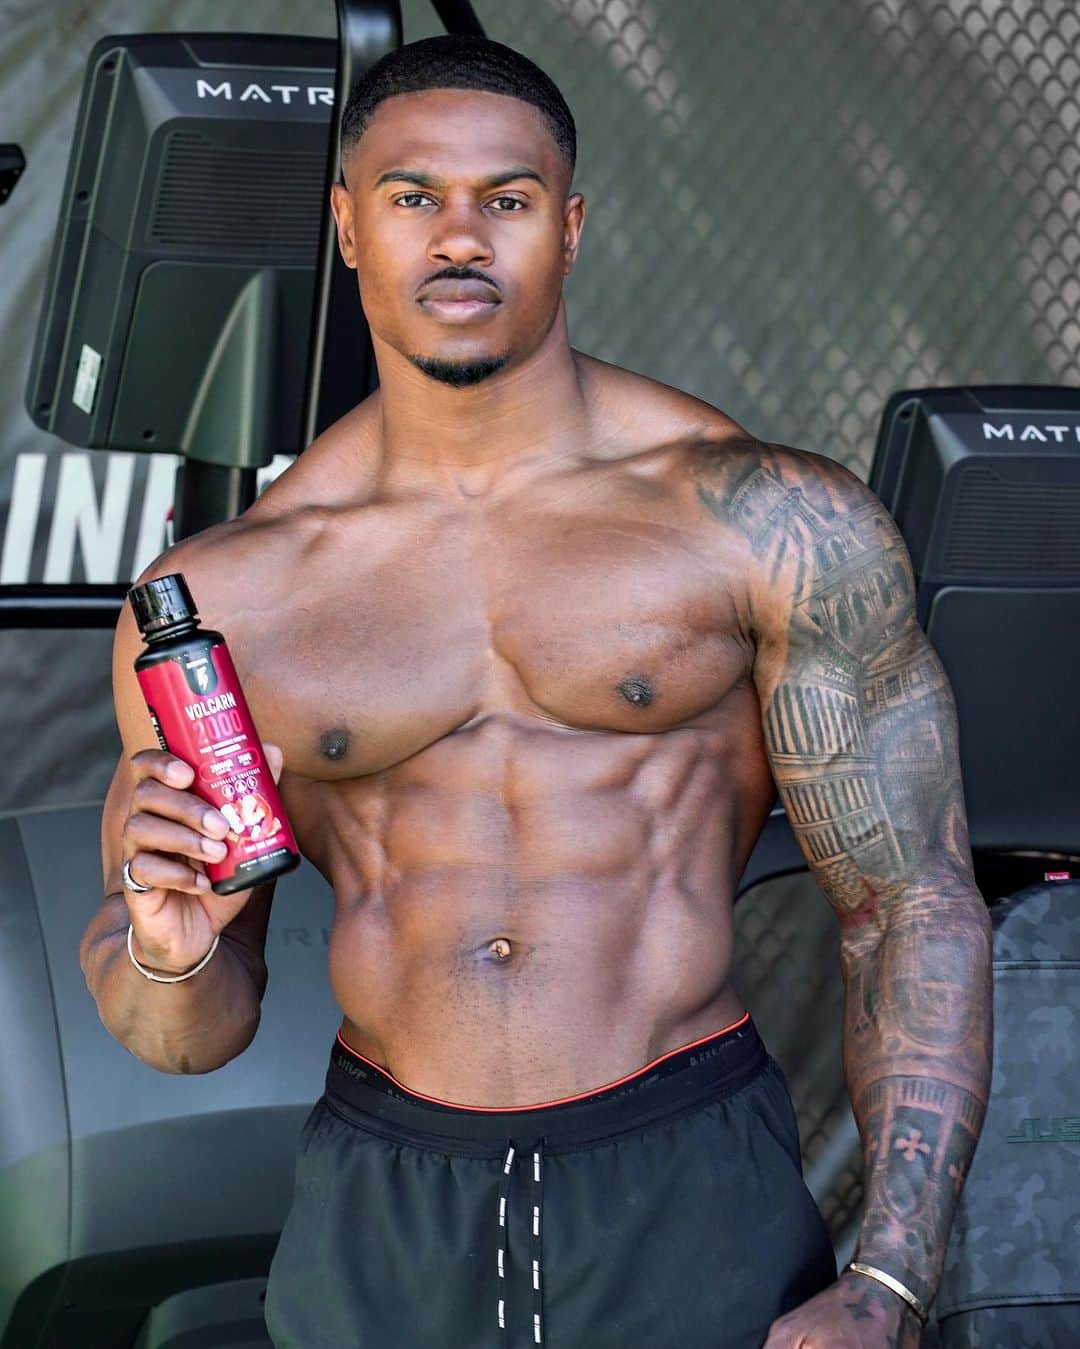 Simeon Pandaのインスタグラム：「FUEL 🔥 @innosupps Volcarn Brings the heat! x 💯 💦😅 Let’s go!   🤔 What’s in Volcarn 2000?⁣⁣ ⁣⁣ 👉🏾 Each serving of Volcarn™ 2000 contains 2000mg of liquid Carnitine and 25mg of GBEEC (“Super Carnitine” 🦸‍♂️) Both ingredients work together to boost your ATP stores (your fuel ⛽️), speed up your metabolism, give you more endurance and the GBEEC is a potent thermogenic they will make you SWEAT 💦 😅⁣⁣⁣⁣⁣ ⁣⁣⁣⁣⁣ 🌱 Volcarn 2000 contains ZERO artificial sweeteners, fillers, and harmful additives. ⁣⁣⁣⁣⁣ ⁣⁣ 👉🏾 Link in @innosupps bio or shop at: INNOSUPPS.COM⁣⁣  #innosupps #volcarn」